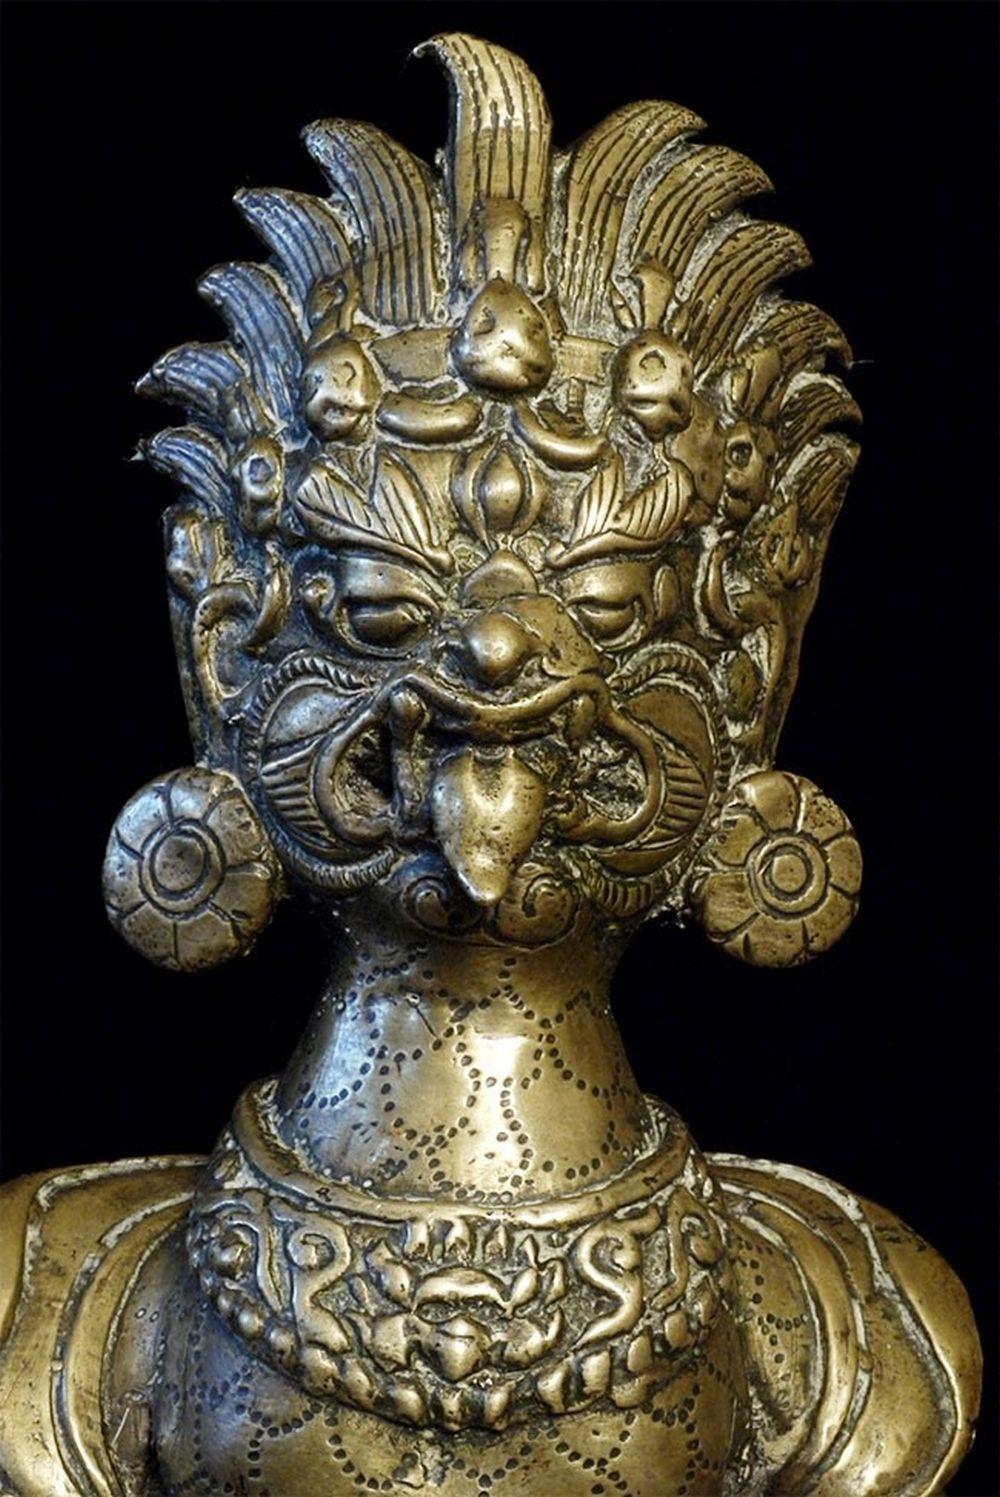 18th/19thC Nepalese bronze or brass fierce deity. I've not seen one like this before. Ten inches tall. Filled with Tantric energy. Real charisma-when there is a room filled with statues, he almost pulls people's eyeballs to him. Very well cast,